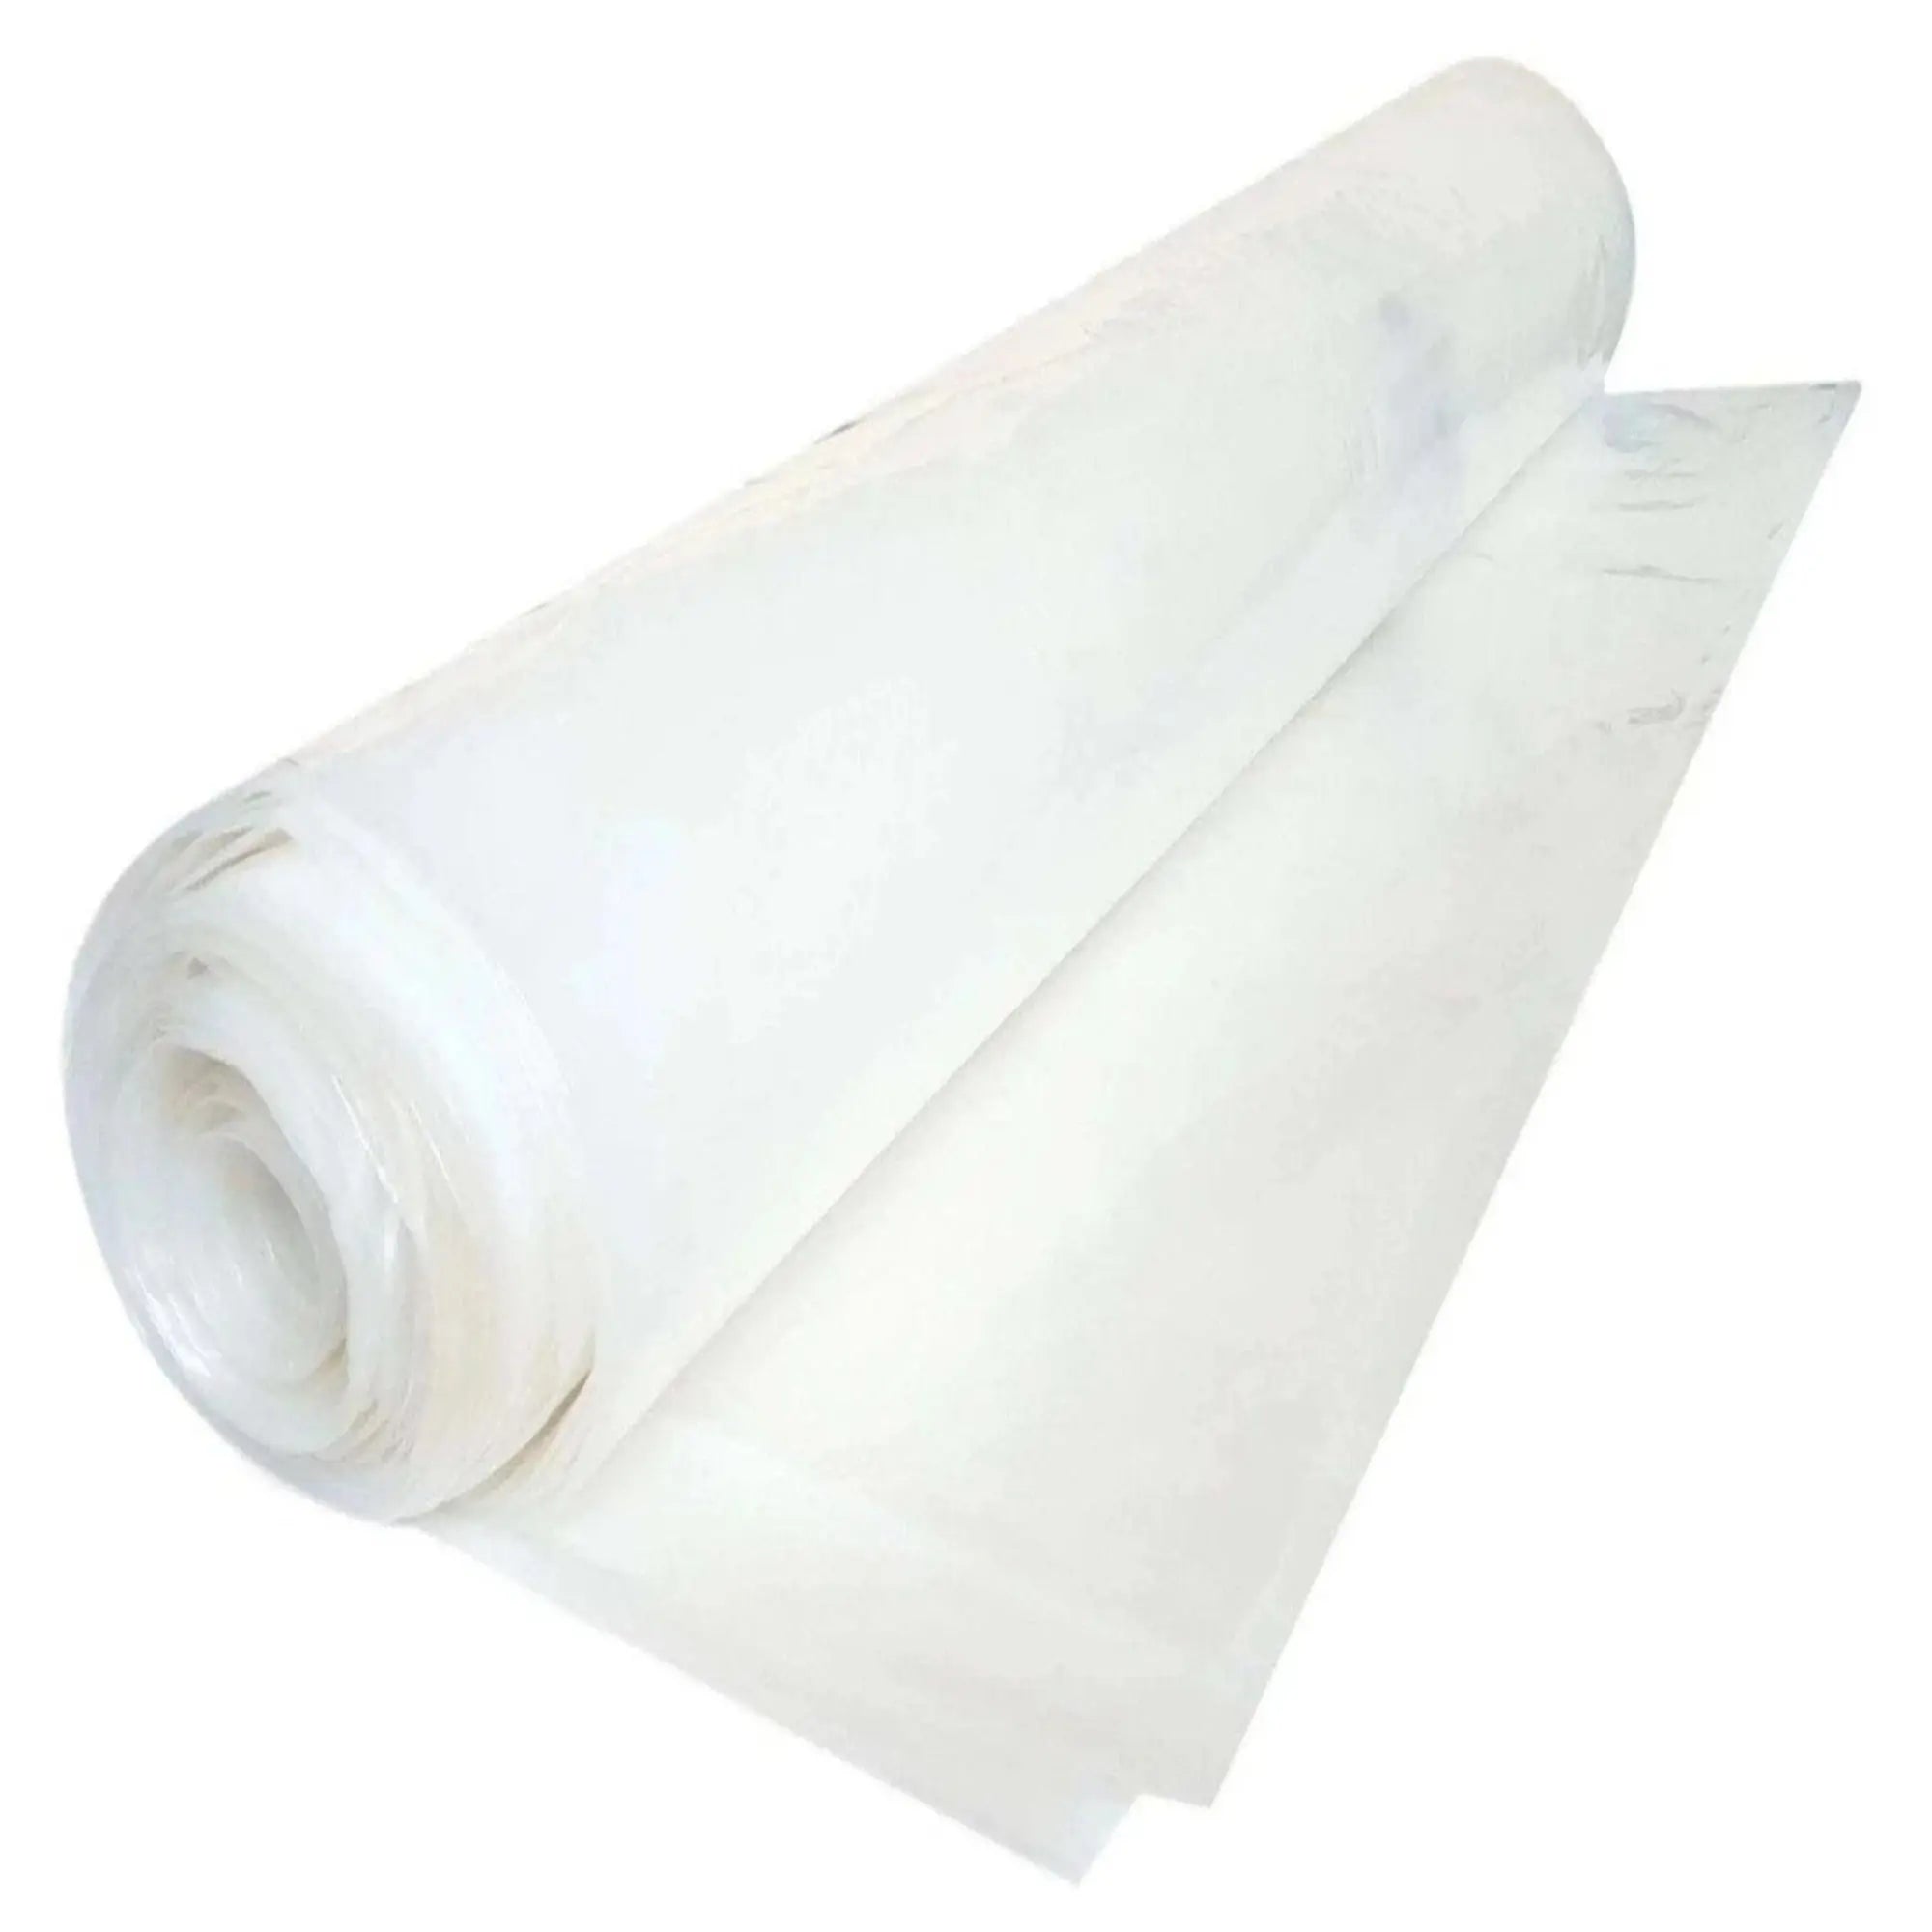 Clear Polyethylene Sheeting Rolls Up To 50 Ft. Wide